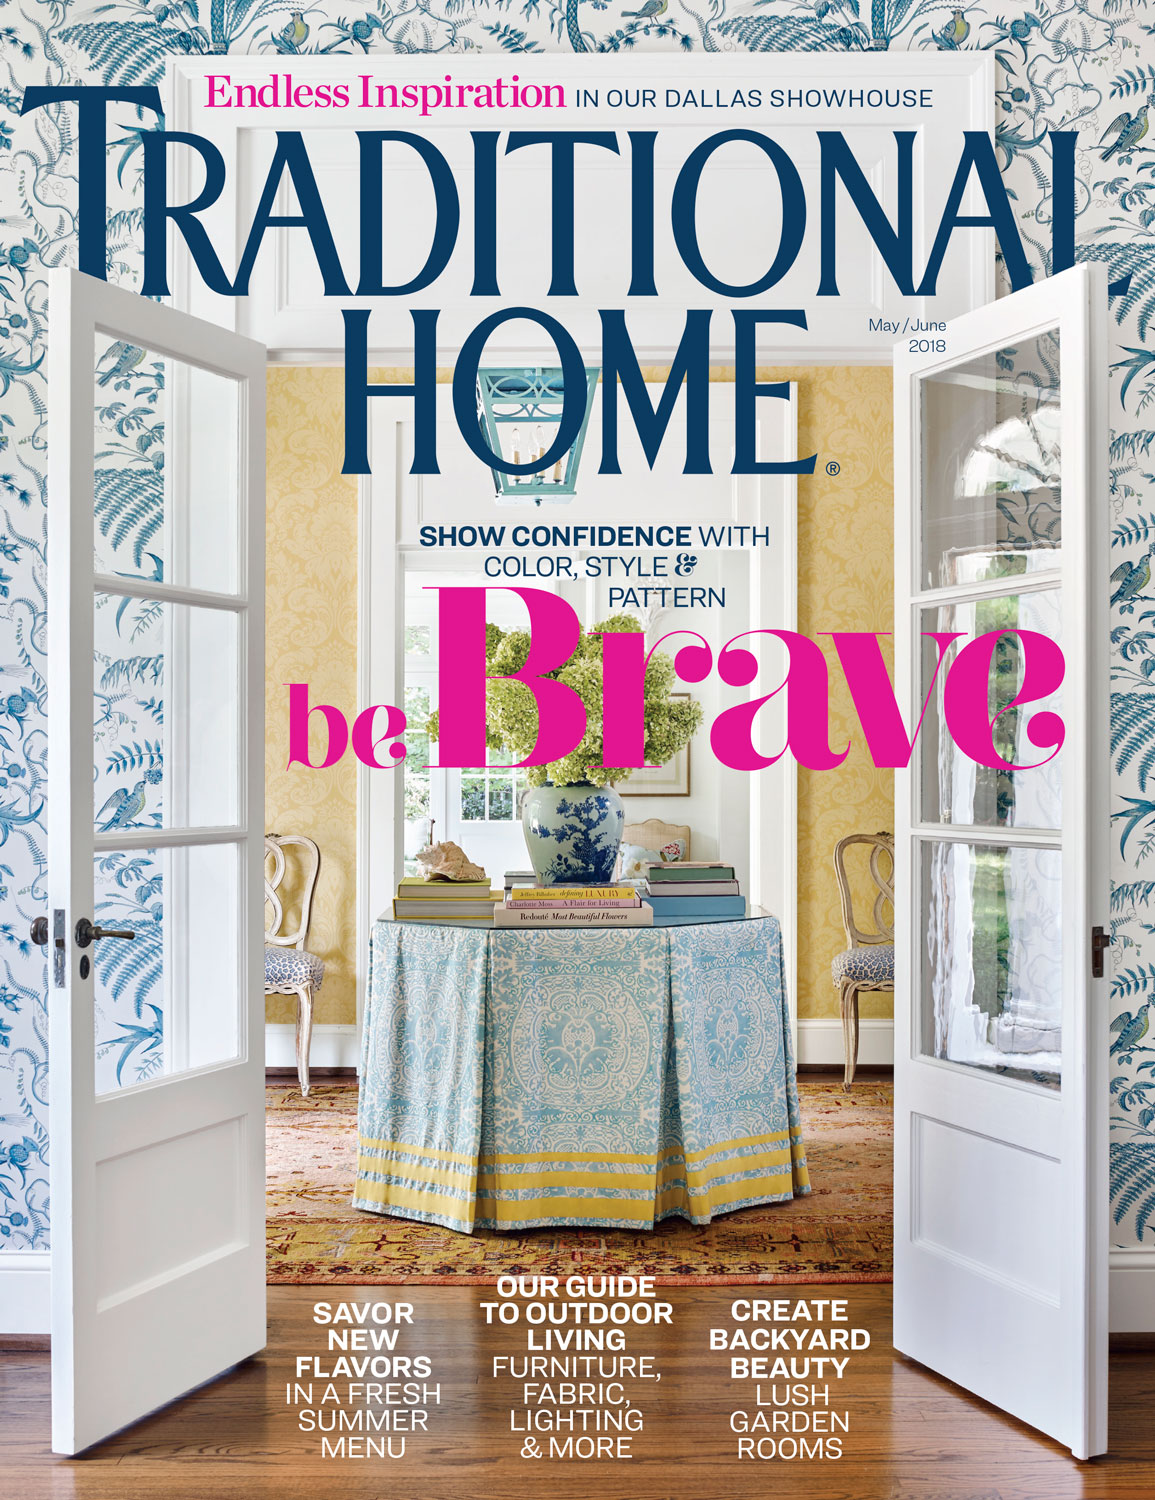 Traditional Home: May 2018 cover